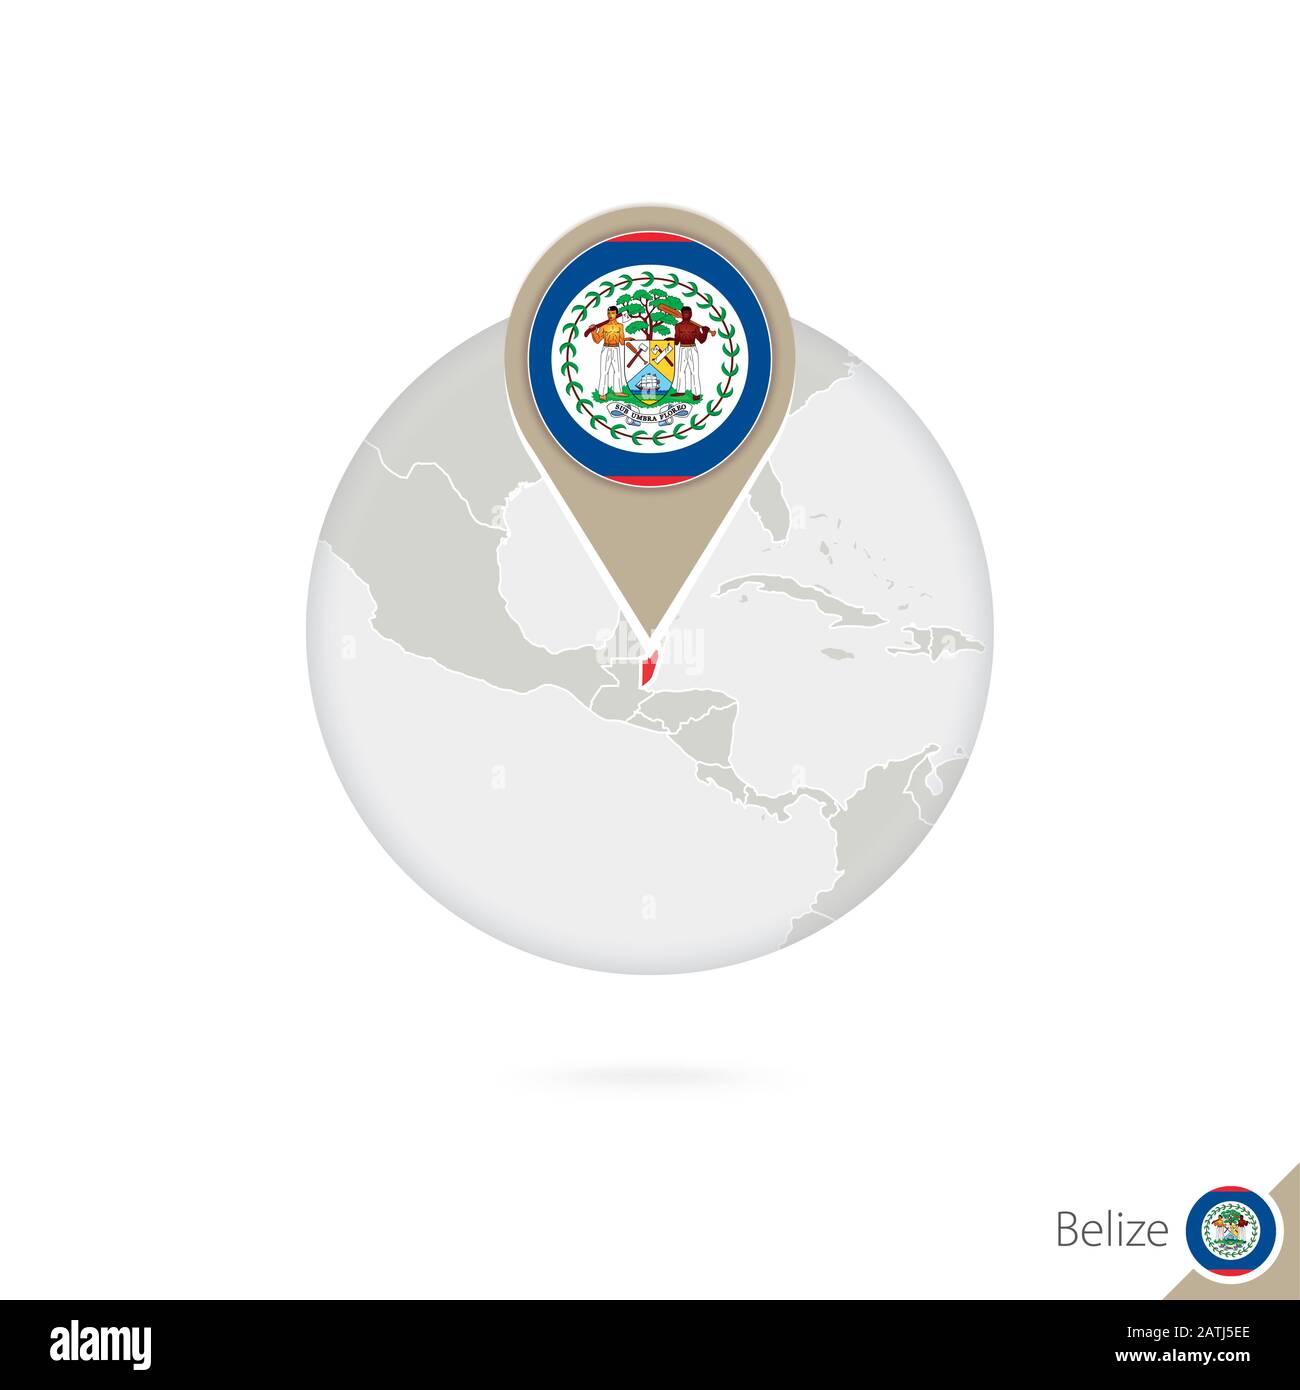 Belize map and flag in circle. Map of Belize, Belize flag pin. Map of Belize in the style of the globe. Vector Illustration. Stock Vector